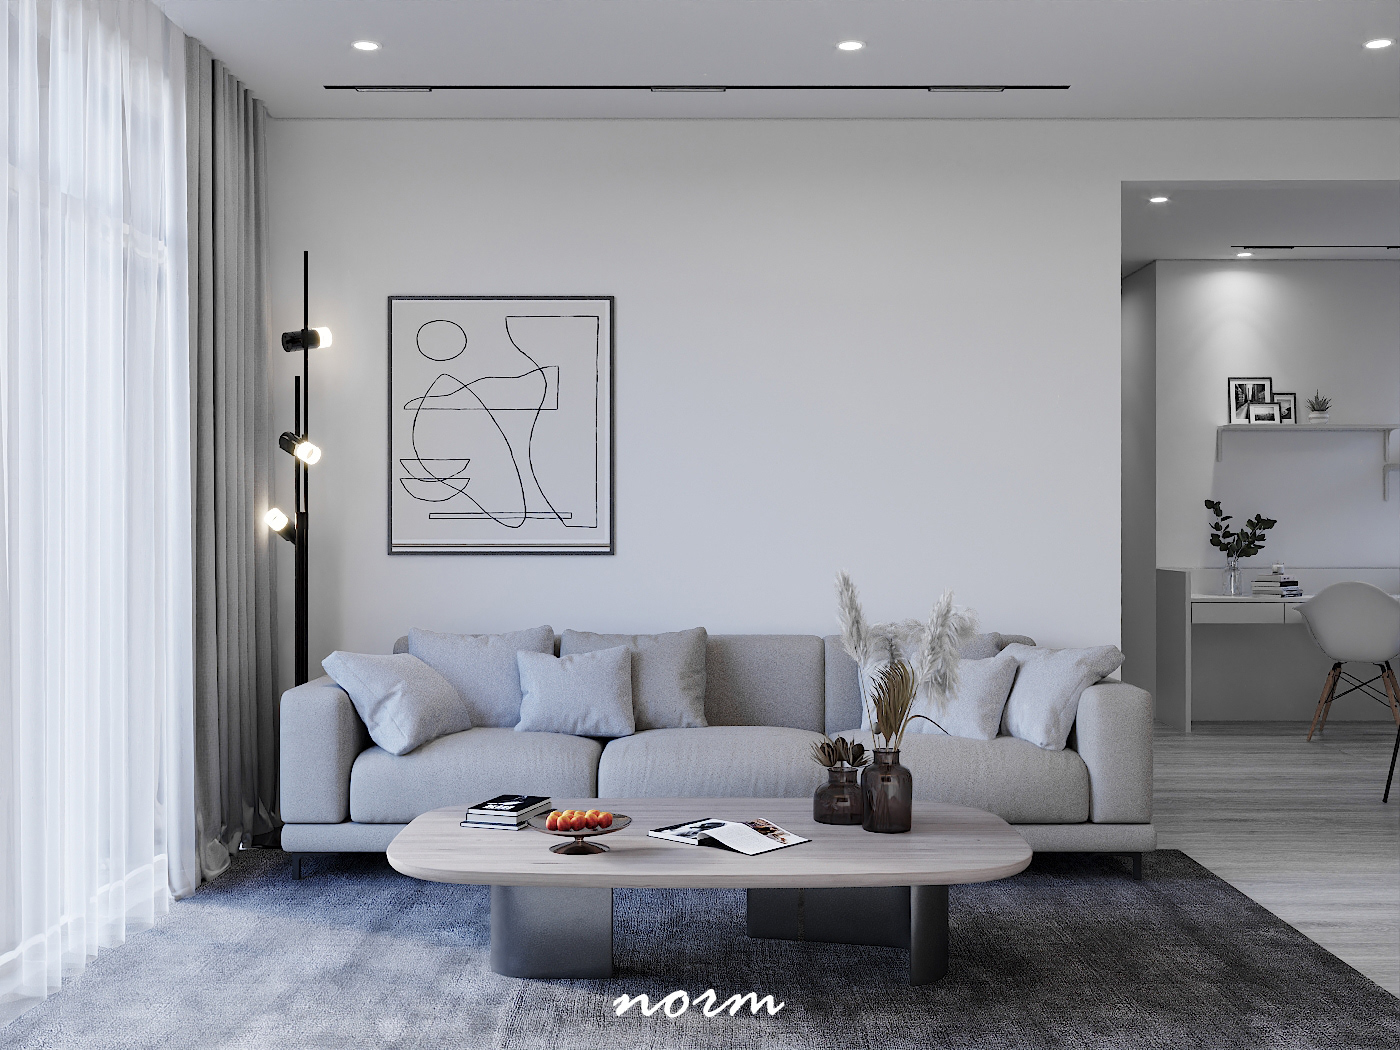 A dark gray rug and light gray sofa complement each other perfectly in this room, building a sense of intimacy and comfort. With natural light snags, this will be a great spot for family members to read and talk.